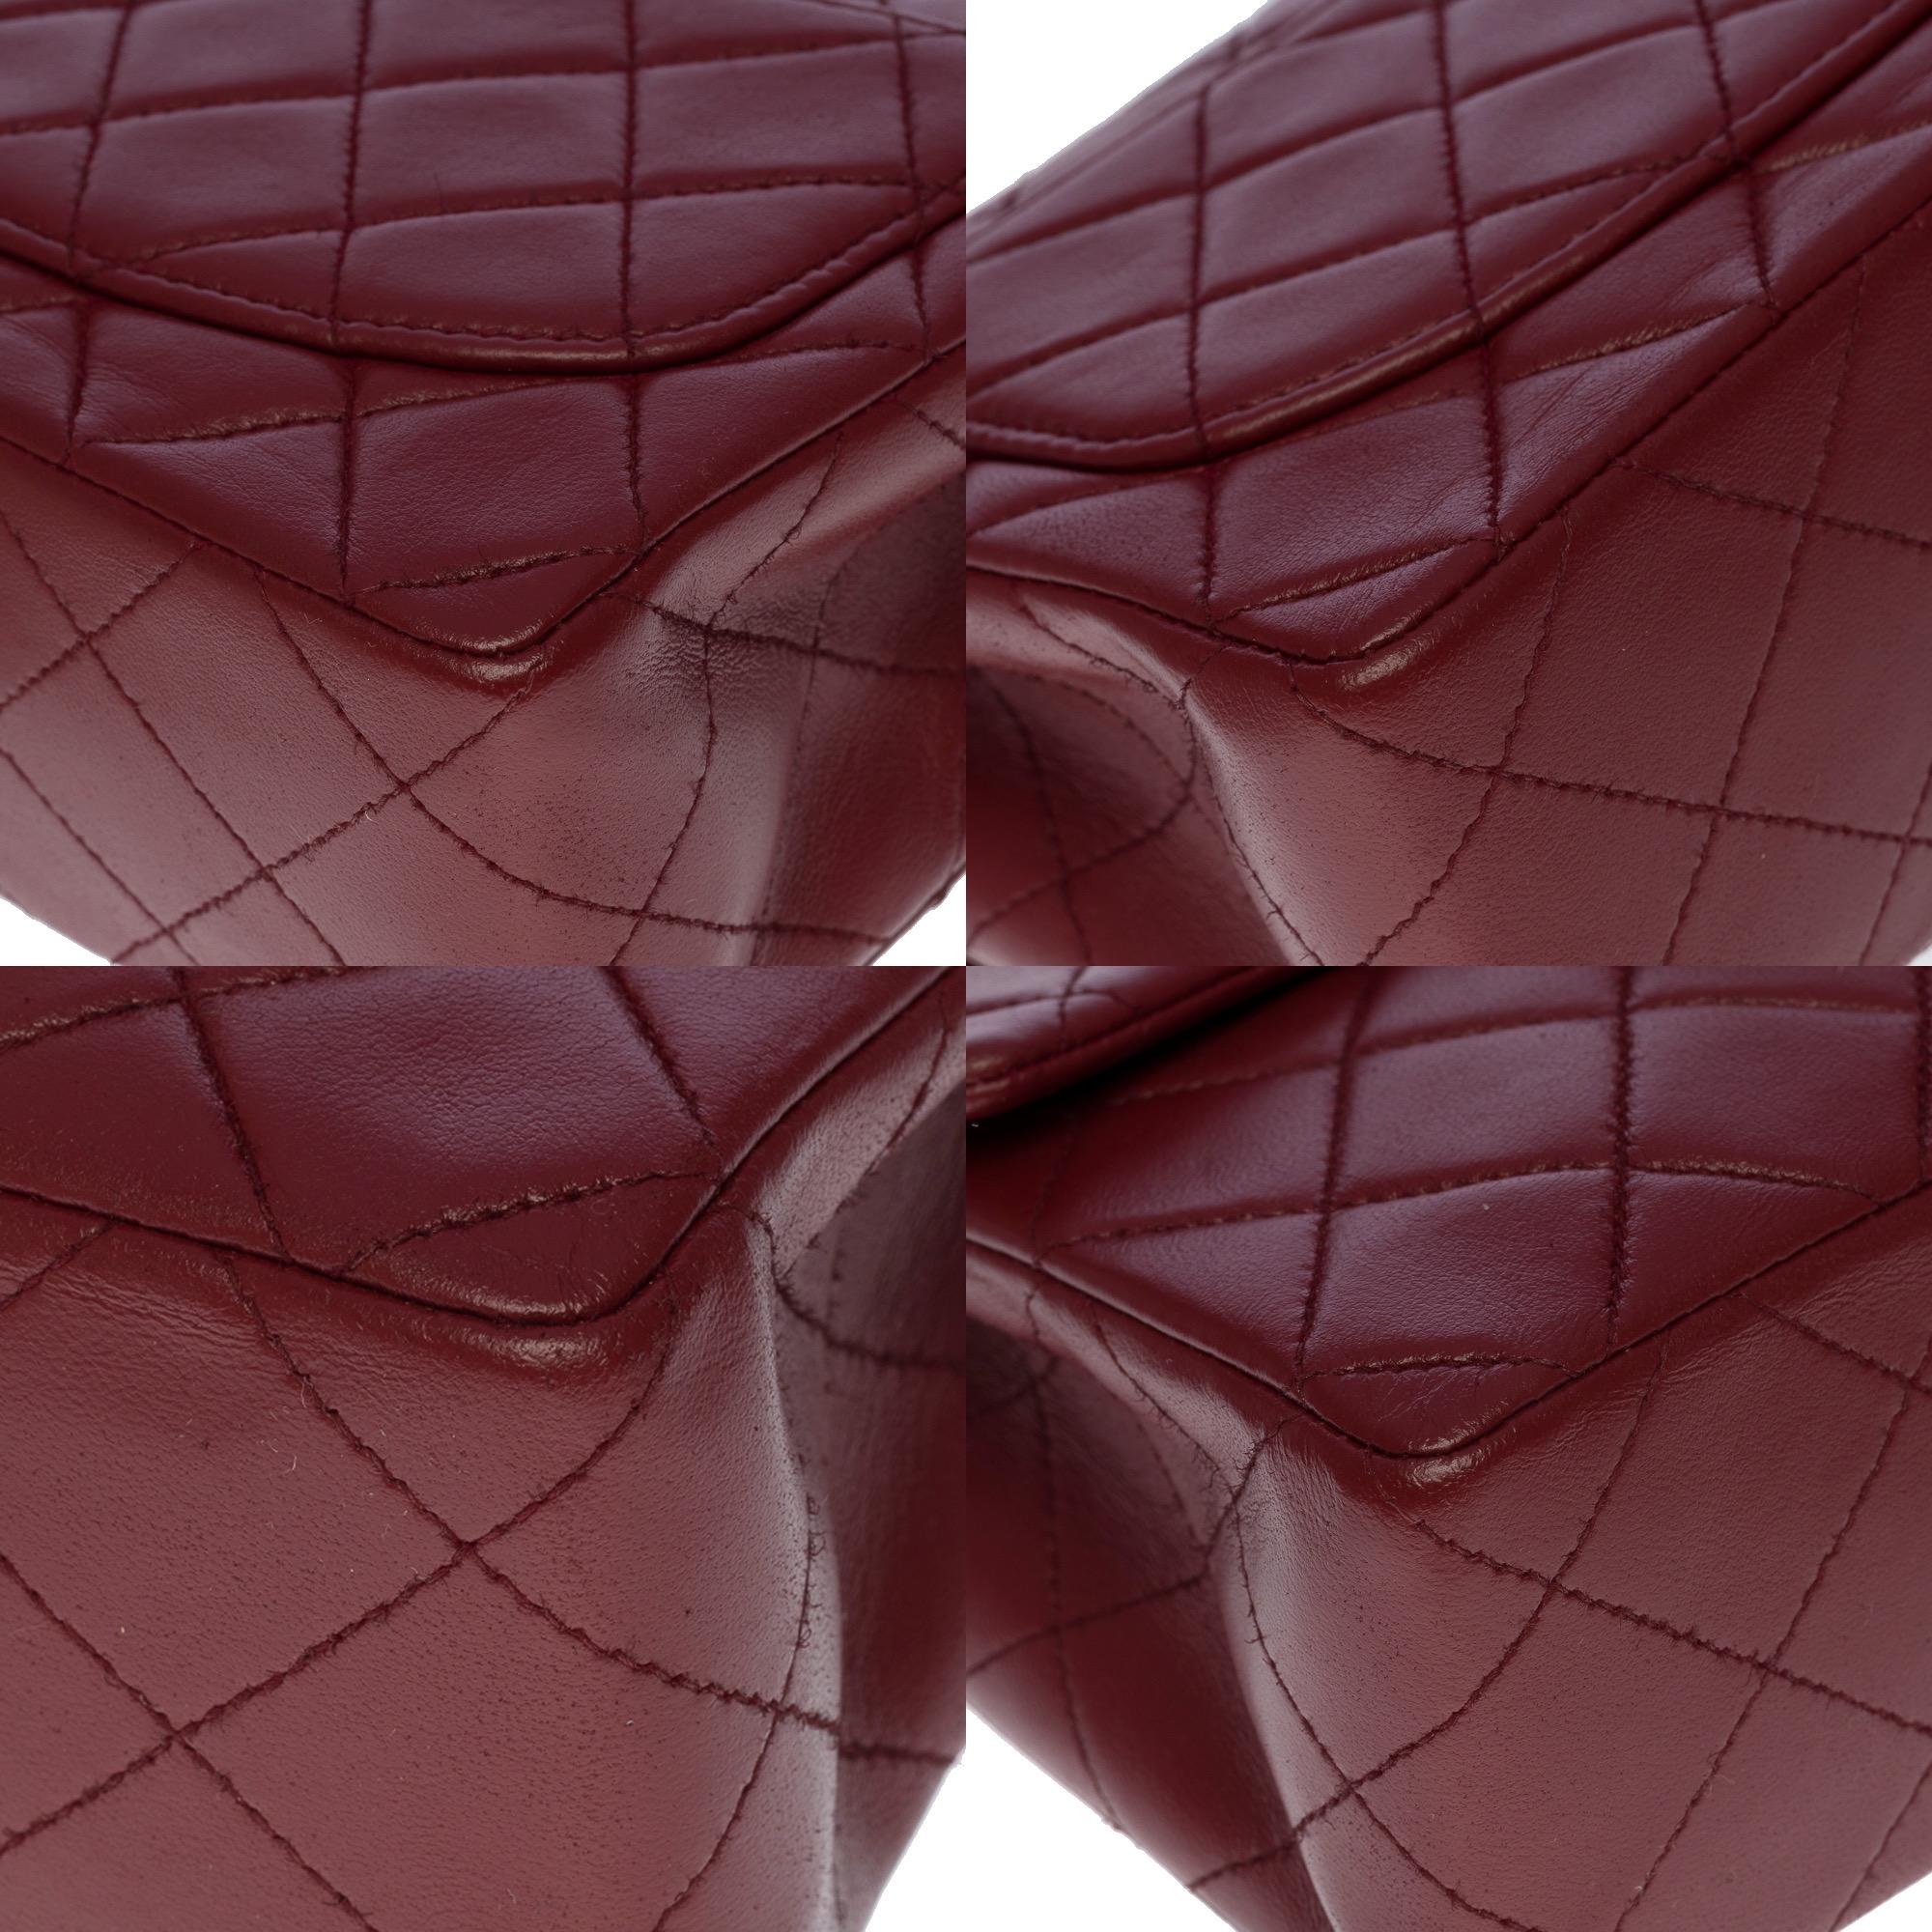 Splendid Chanel Timeless Mini flap bag in burgundy quilted leather, GHW 3